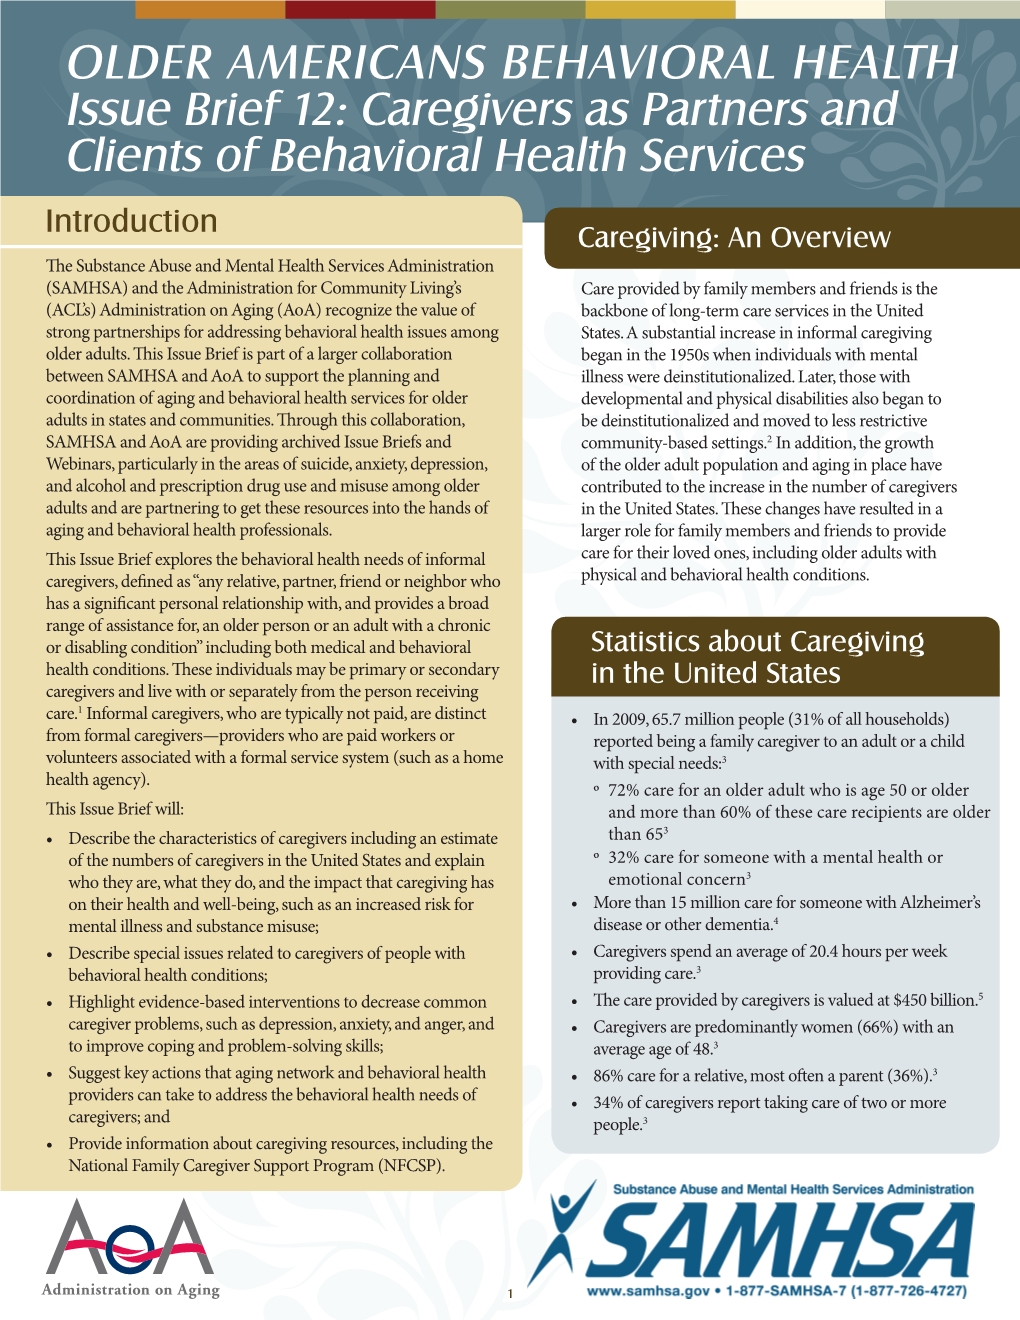 Caregivers As Partners and Clients of Behavioral Health Services